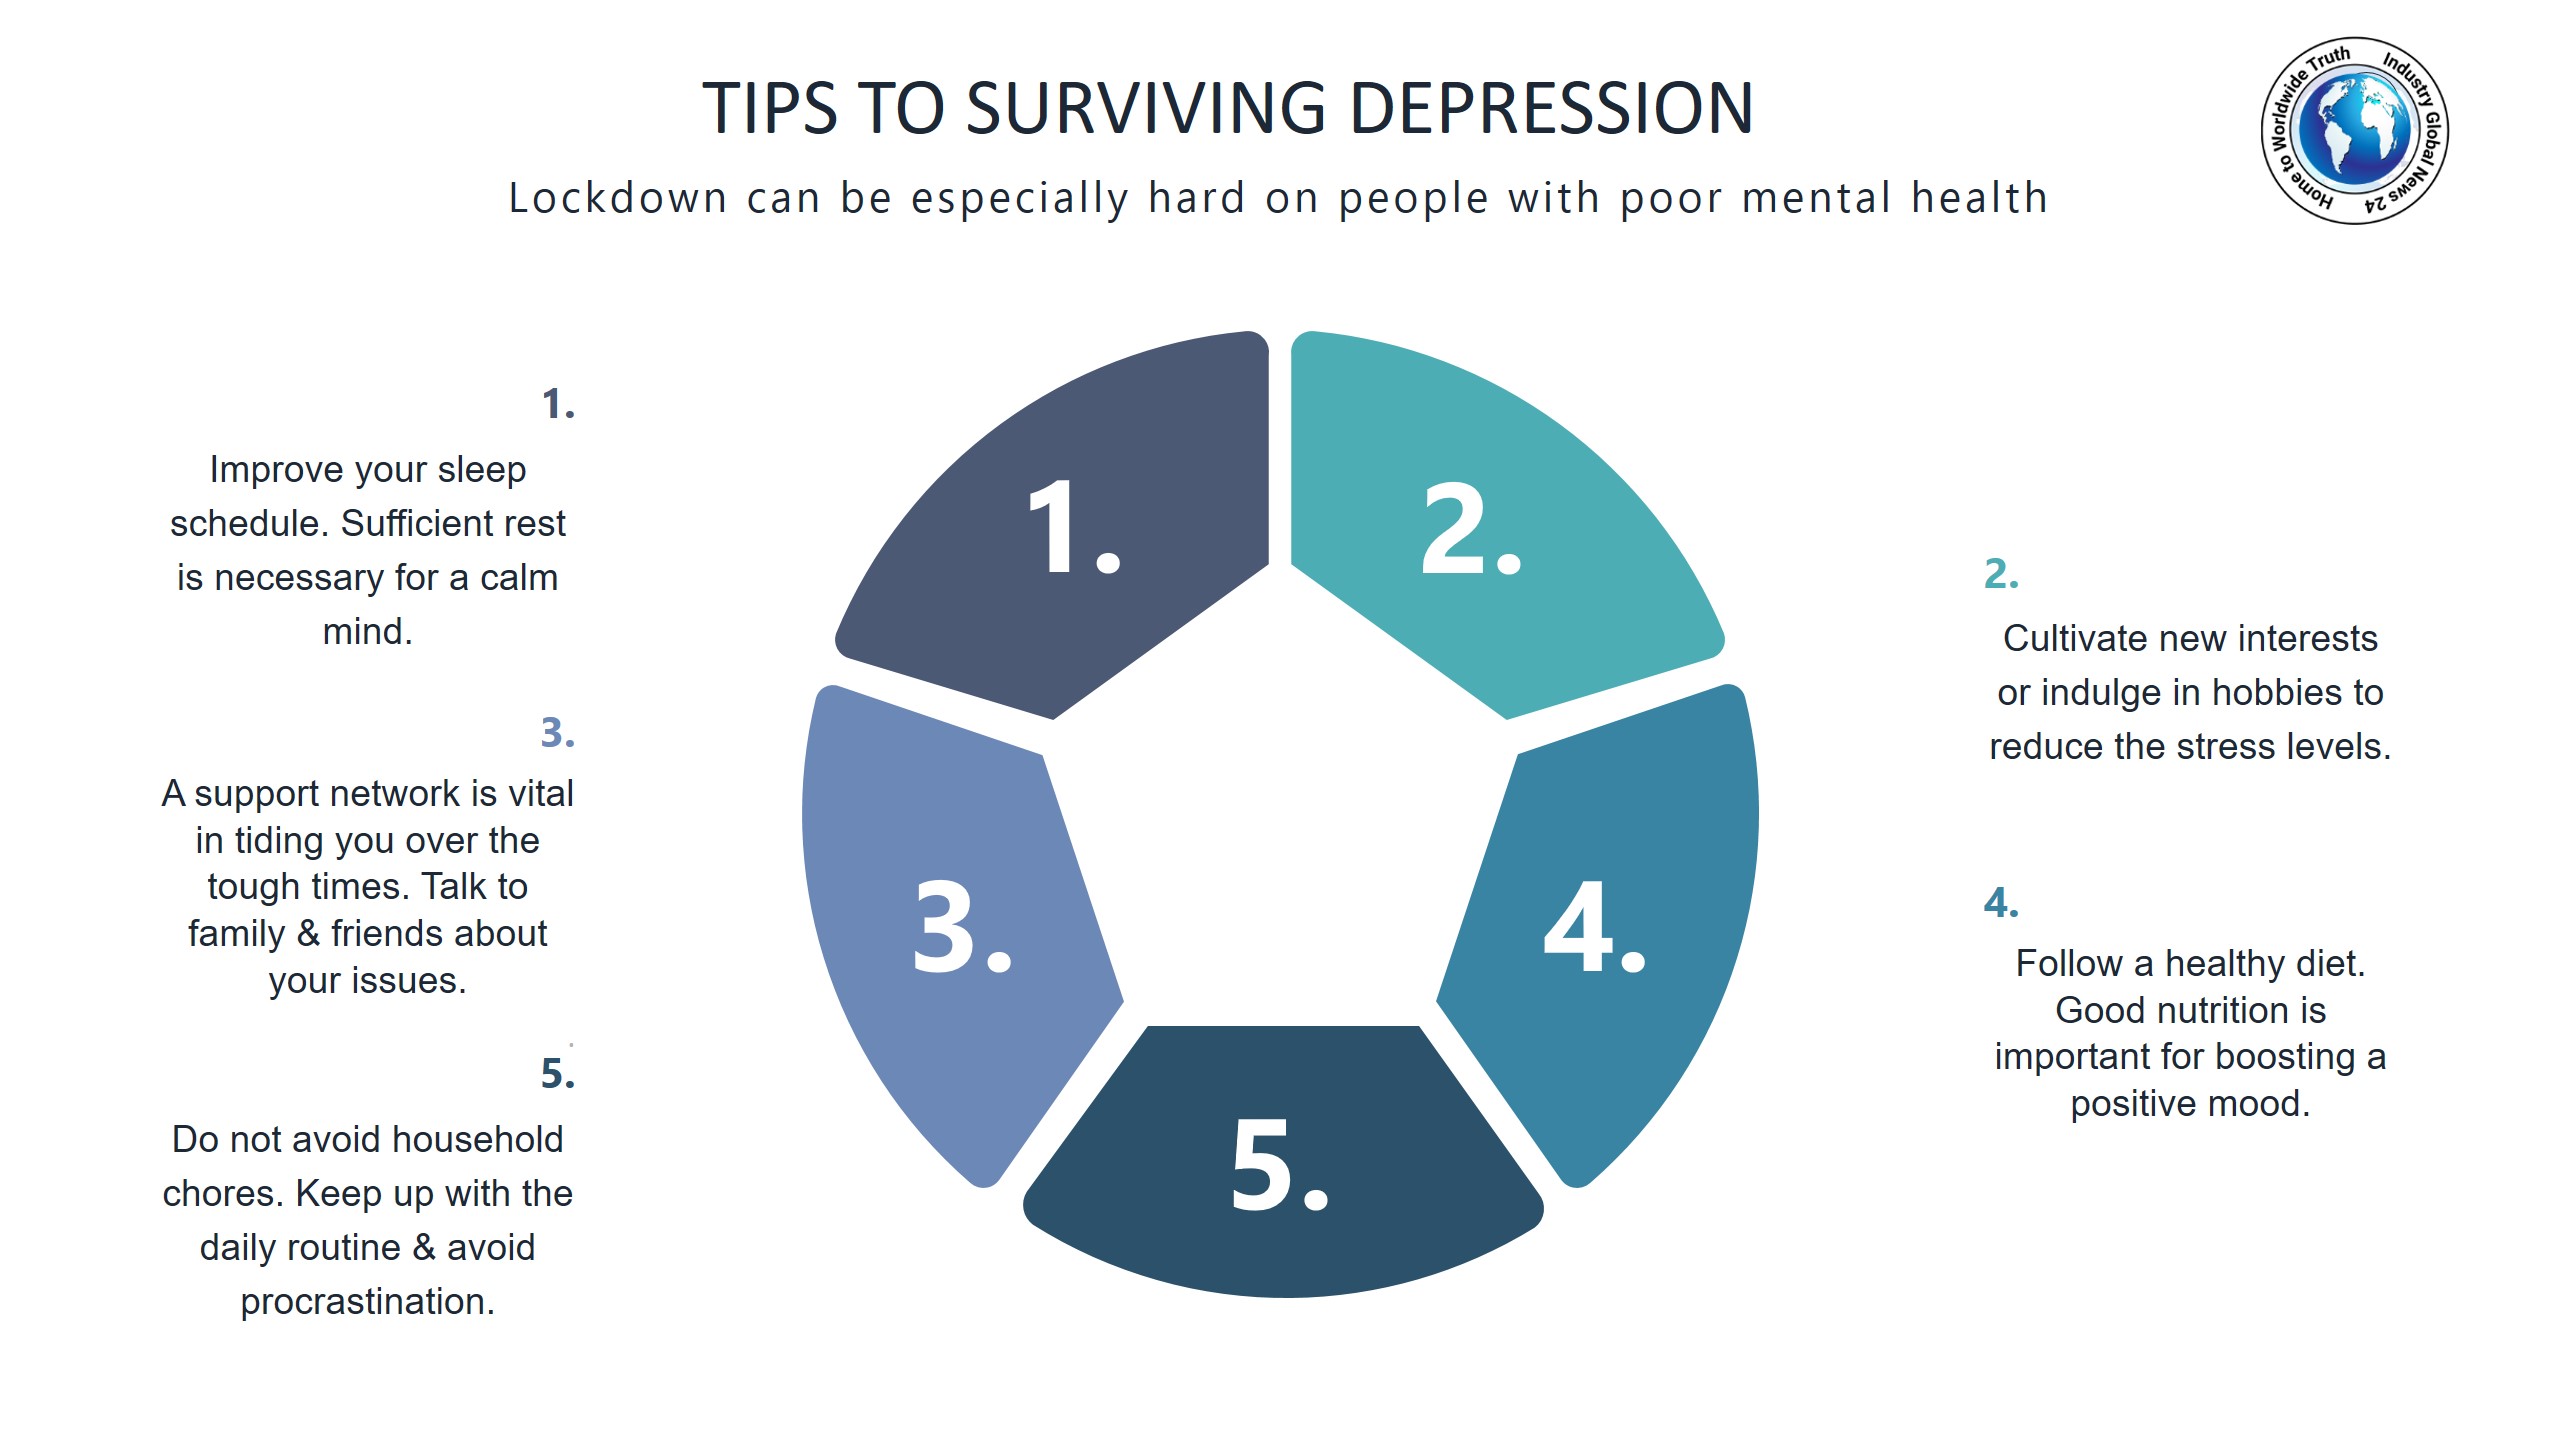 Tips to surviving depression